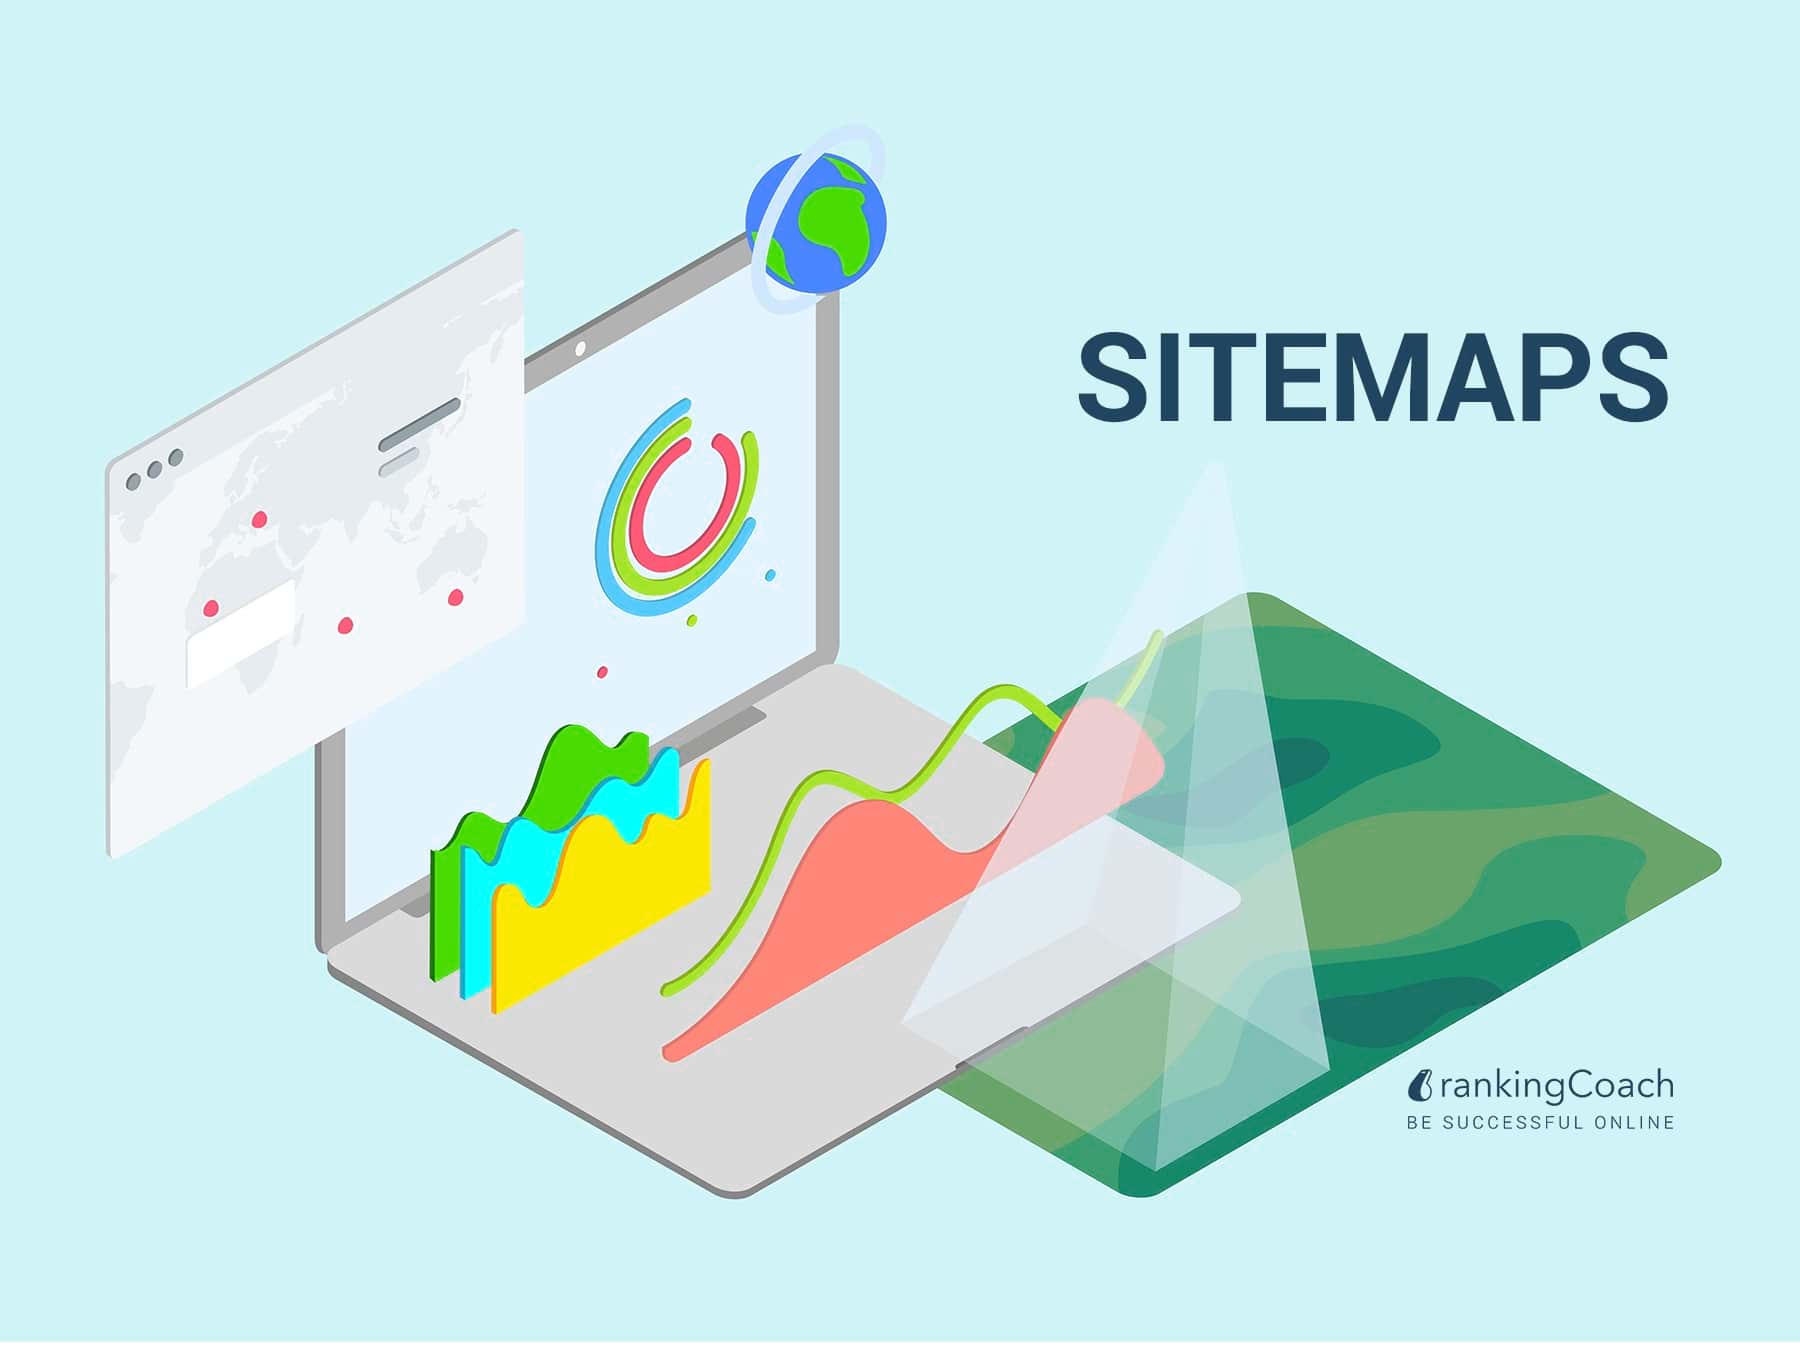 What Is A Sitemap?